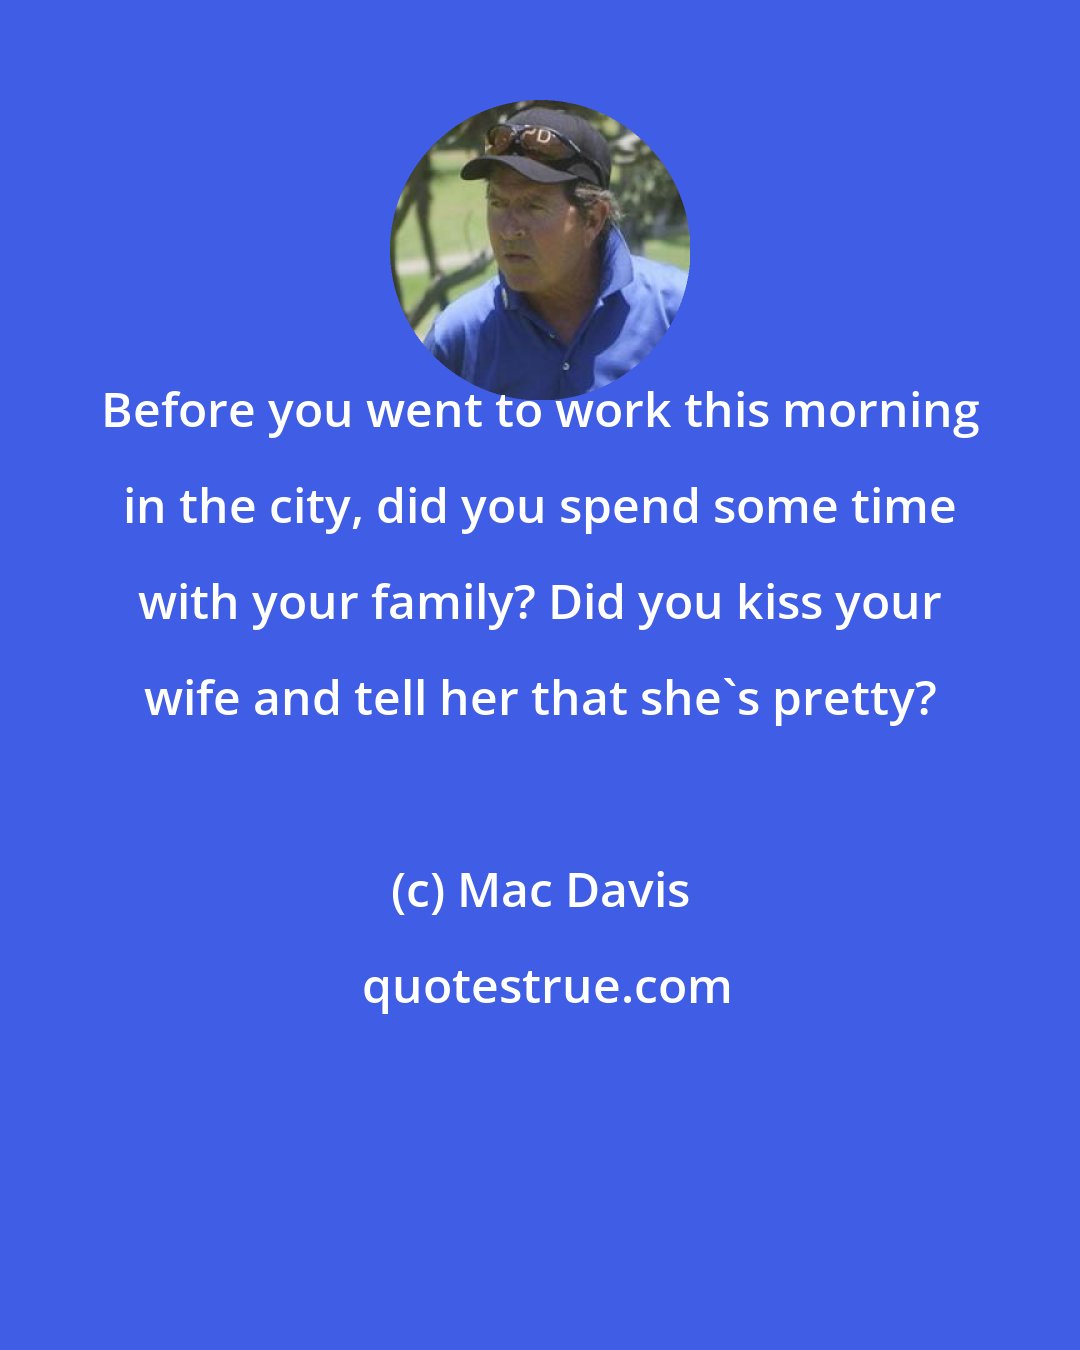 Mac Davis: Before you went to work this morning in the city, did you spend some time with your family? Did you kiss your wife and tell her that she's pretty?